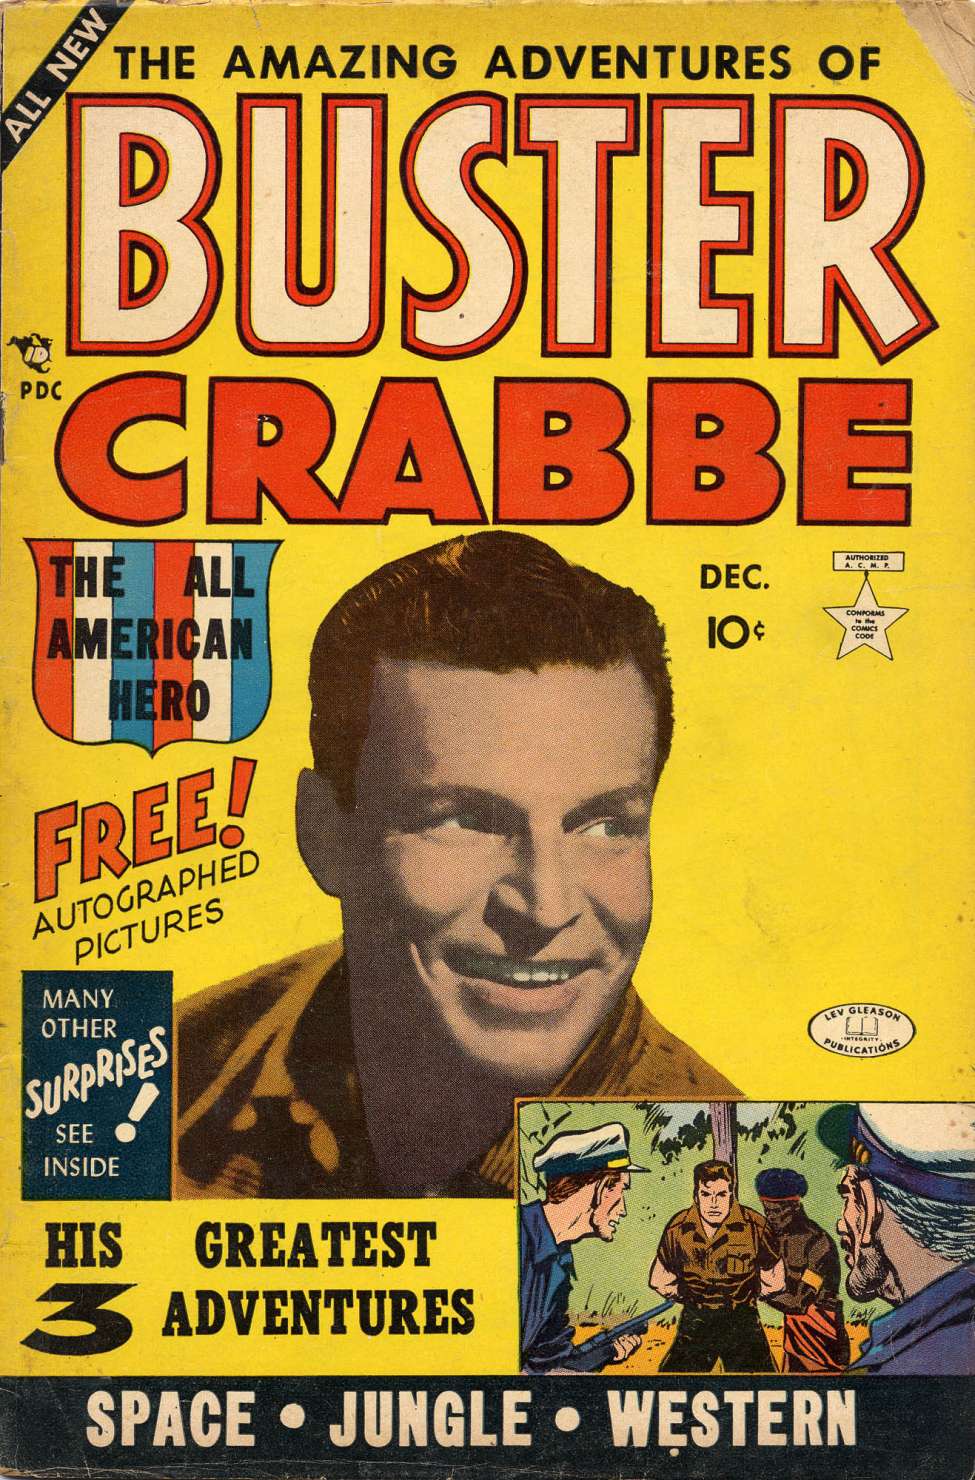 Book Cover For The Amazing Adventures of Buster Crabbe 1